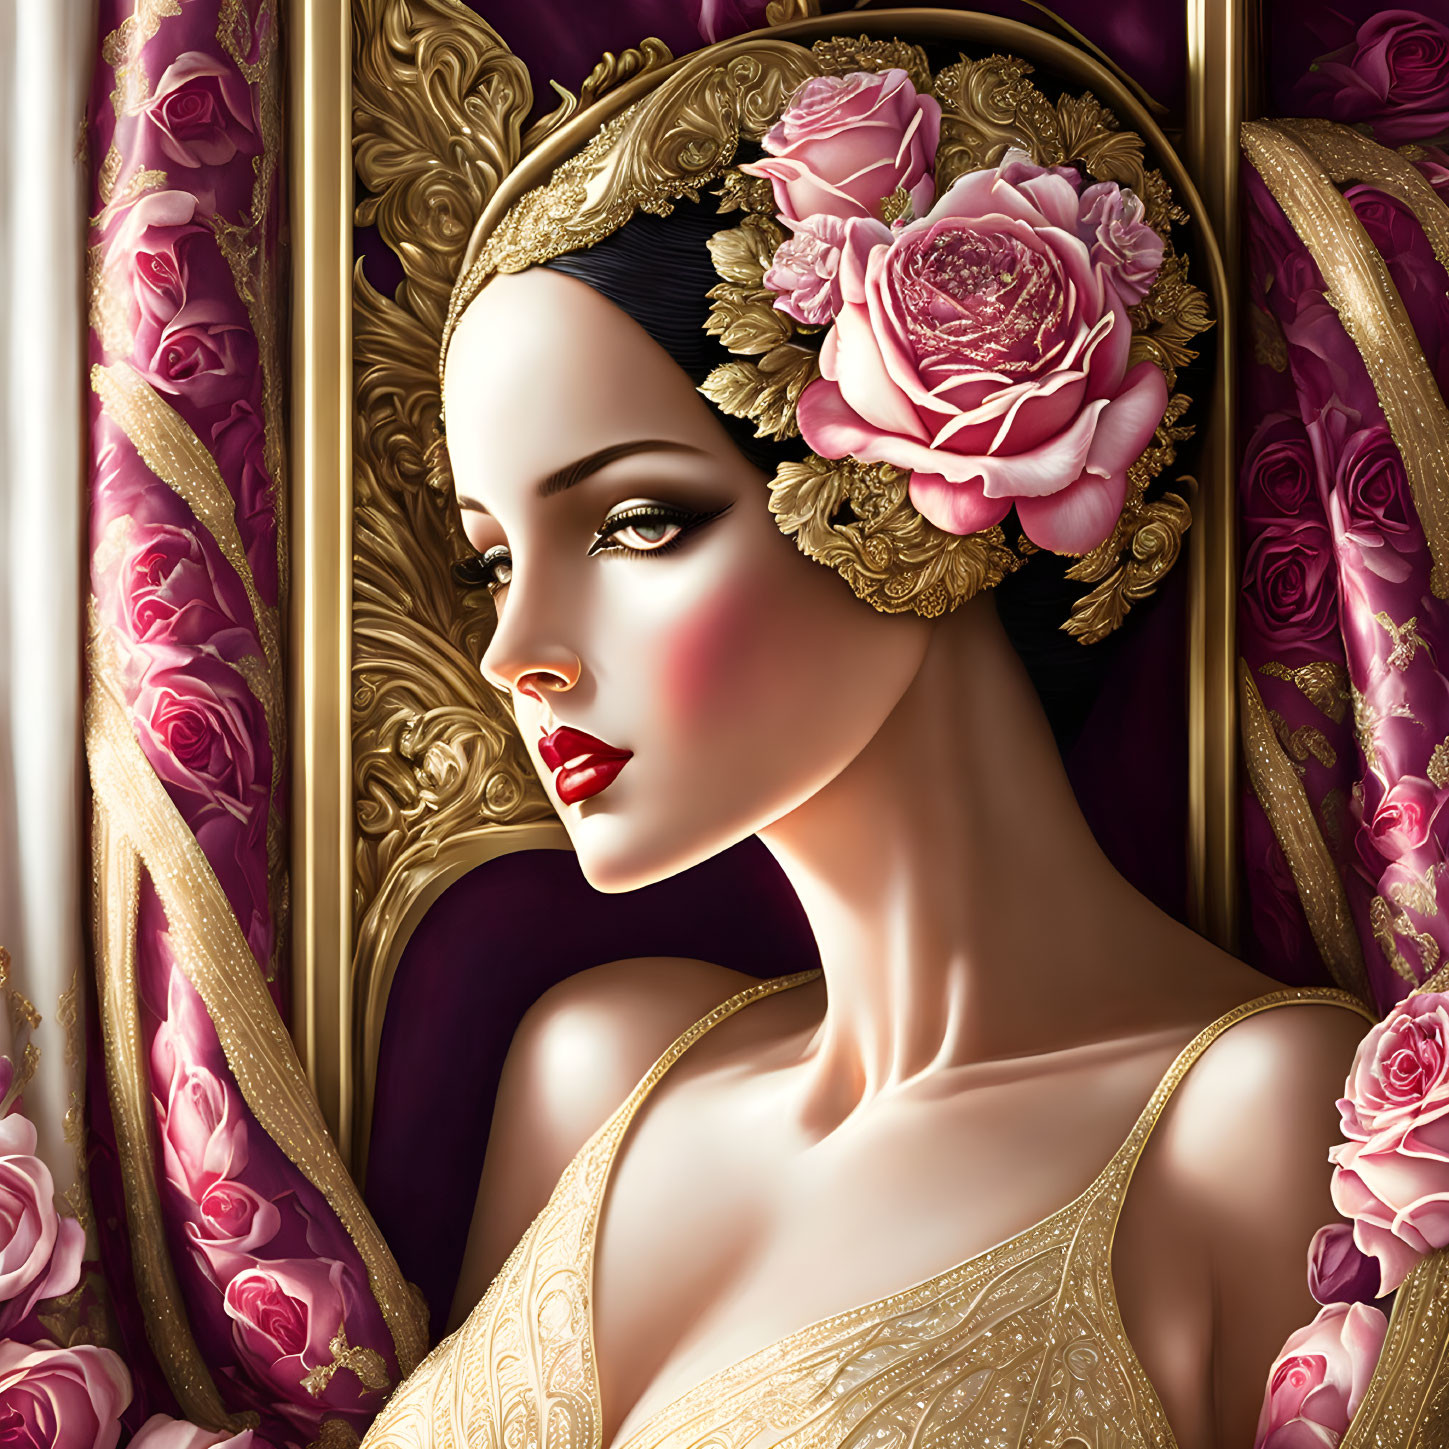 Illustrated portrait of a woman with roses and golden headdress in decorative frame